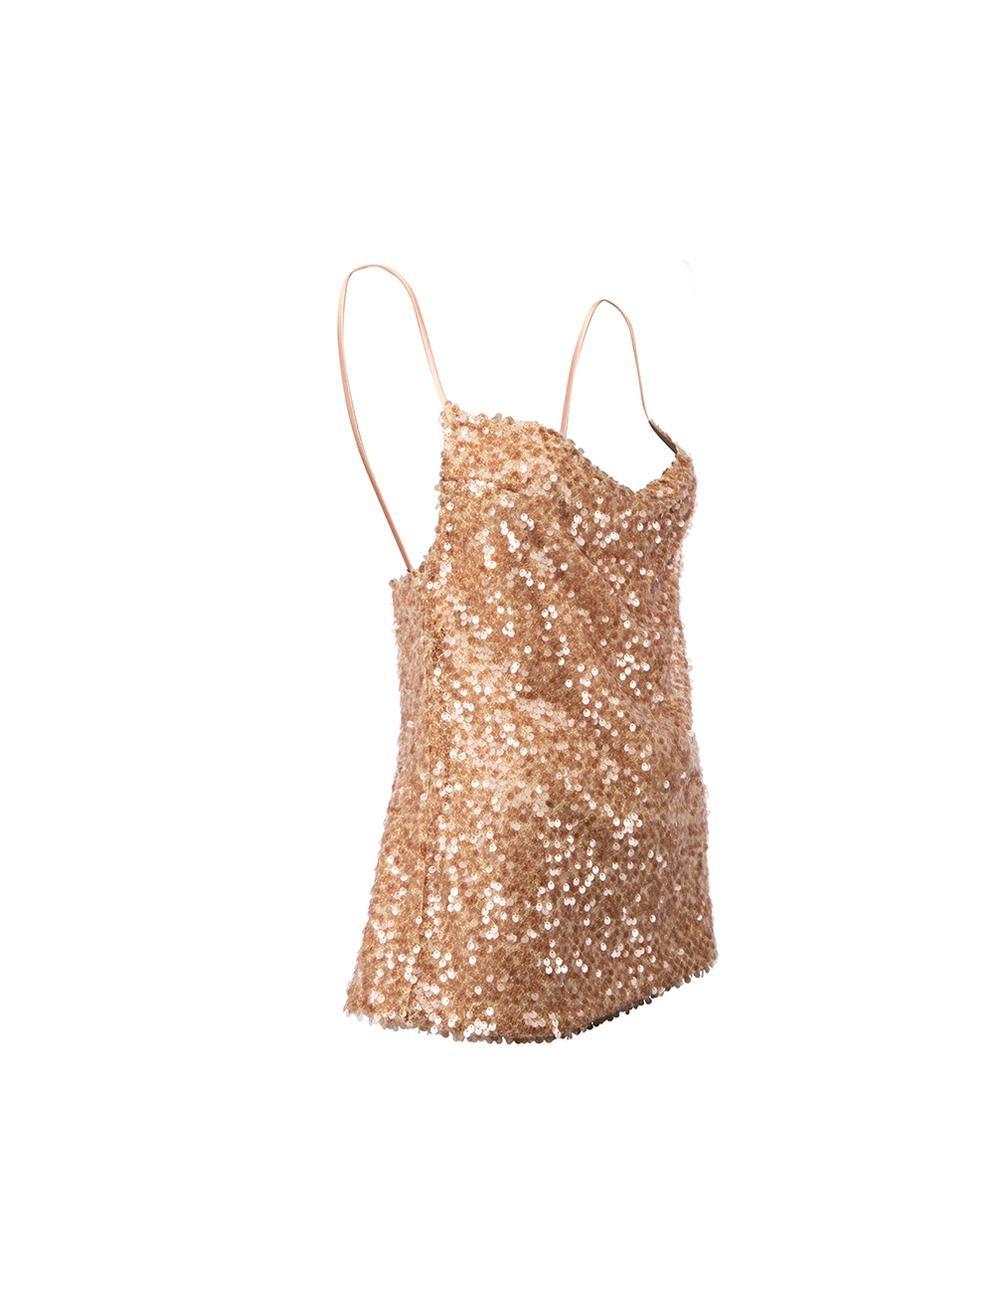 CONDITION is Never worn, with tags. No visible wear to top is evident on this new Galvan London designer resale item. 



Details


Beige

Synthetic

Tank top

Sequinned

V drape neckline





Made in UK



Composition

65% Nylon and 35%